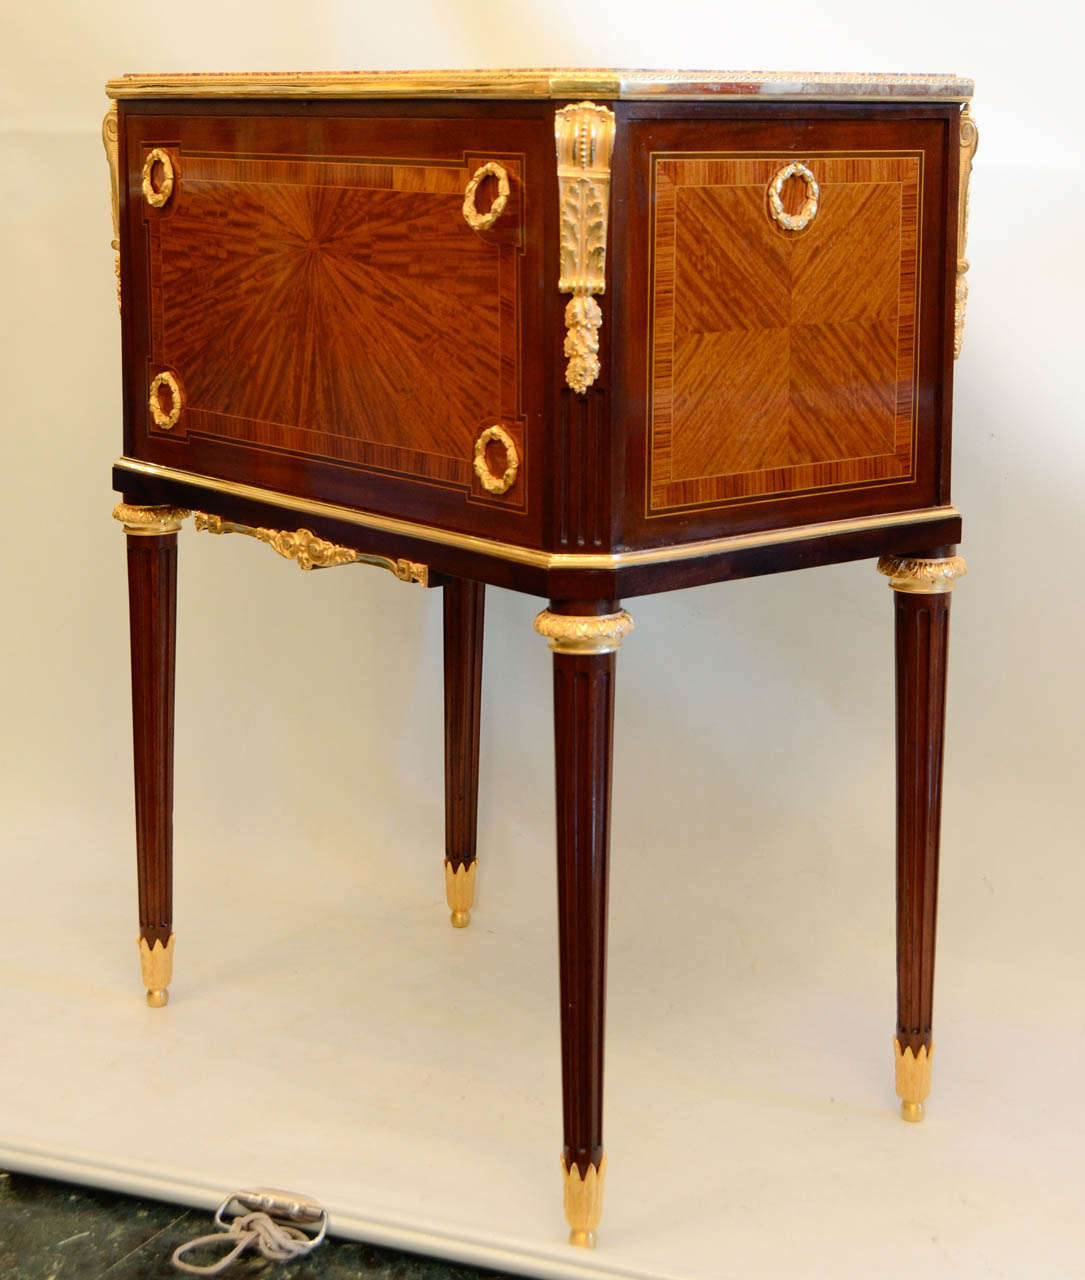 Bar, Louis XVI style, mahogany  and  marquetry  of diverses precious woods , ornemented with gilded bronze.
Opening on each side.